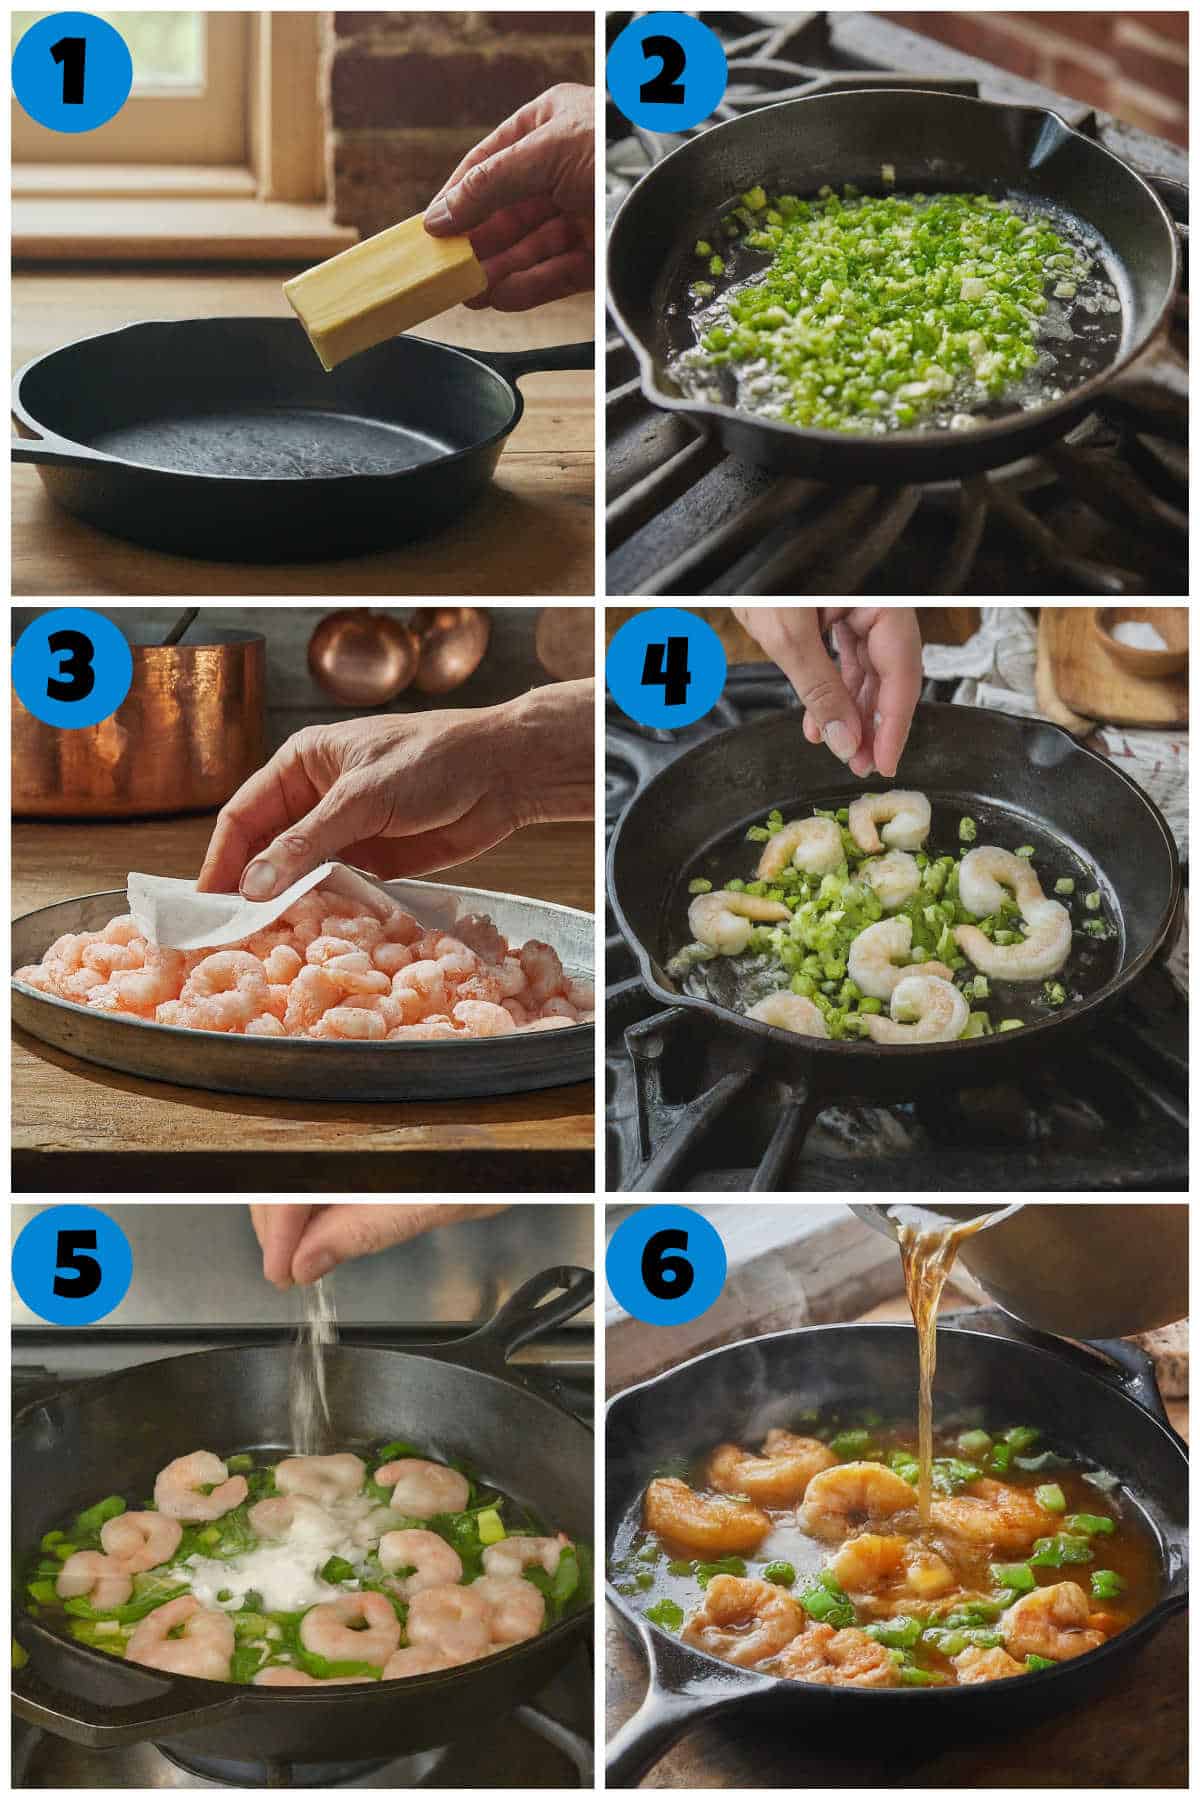 A collage of 6 images showing how to make Irish Fishermans pie. Steps 1 through 6.